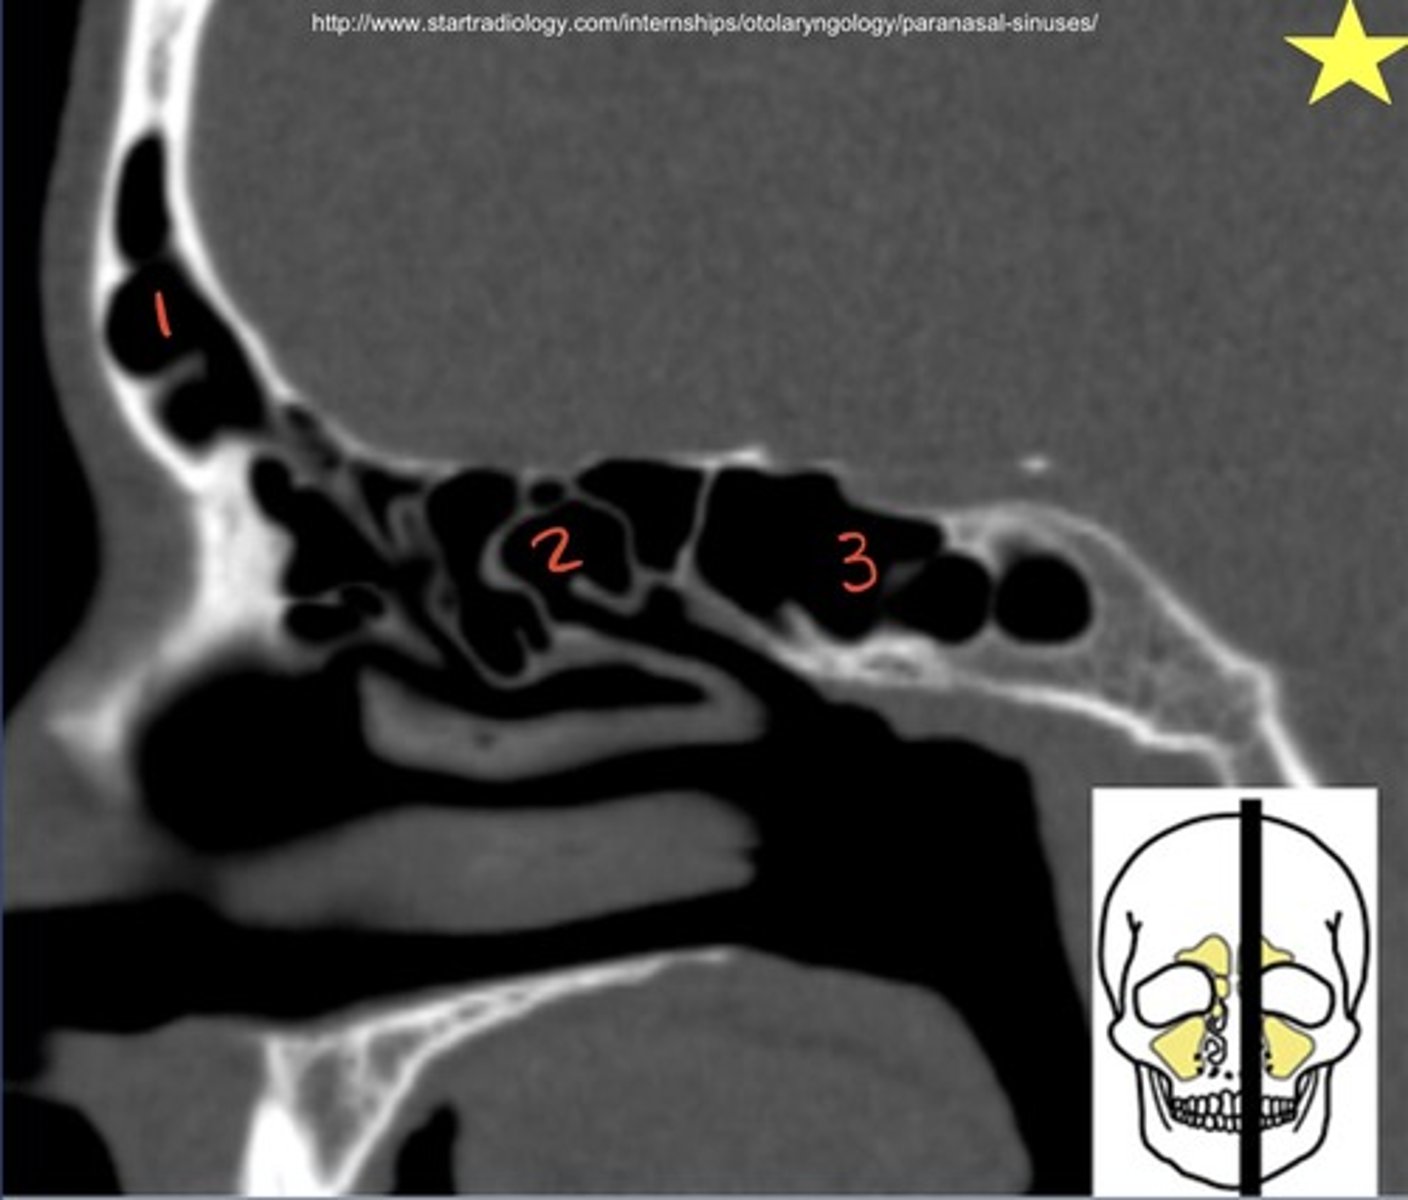 <p>What is the horizontal gray 'bar' below the ethmoid sinus?</p>